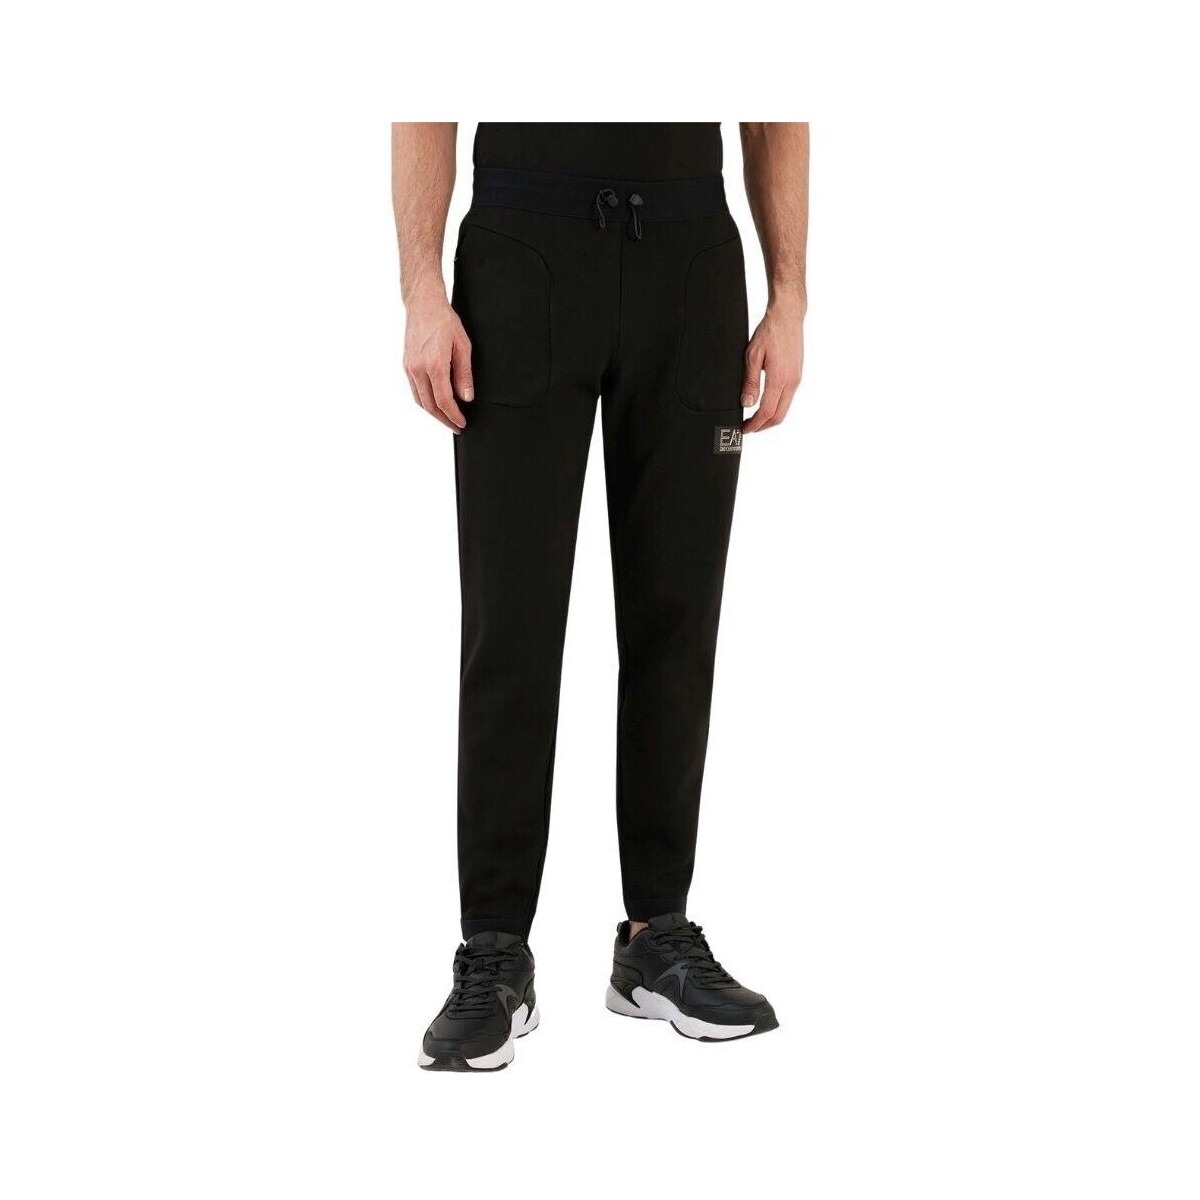 Gent Trousers in Black at Spartoo GOOFASH